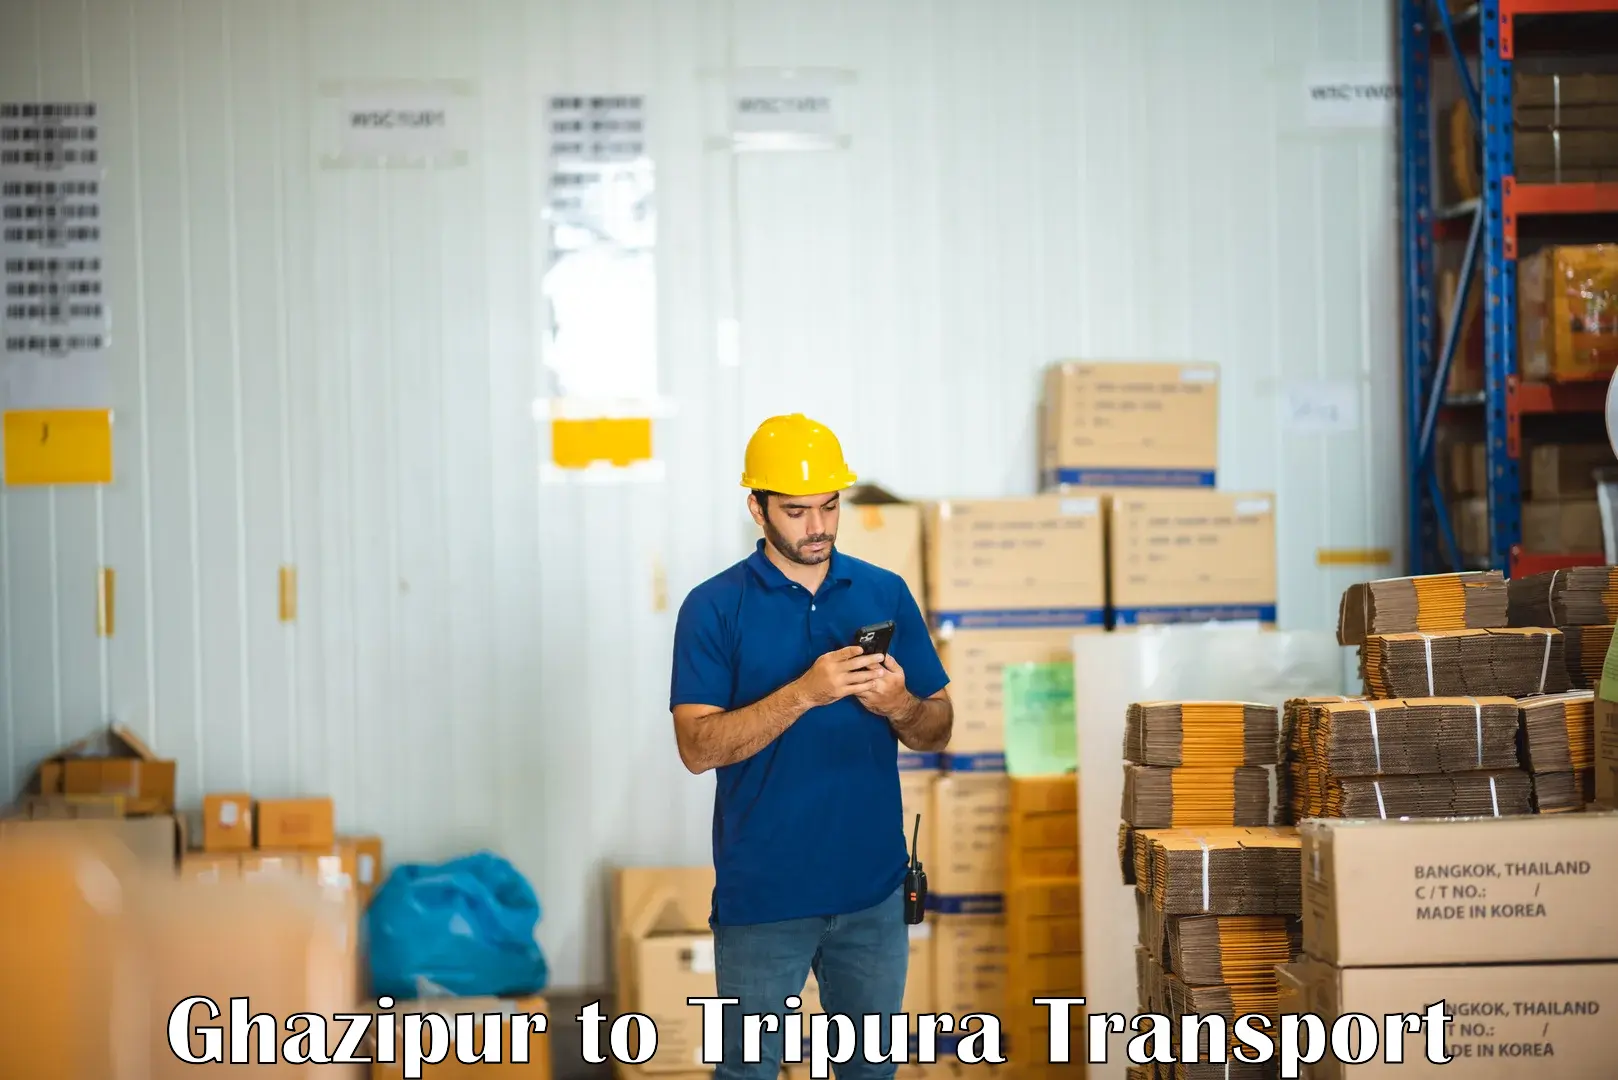 Commercial transport service Ghazipur to Udaipur Tripura